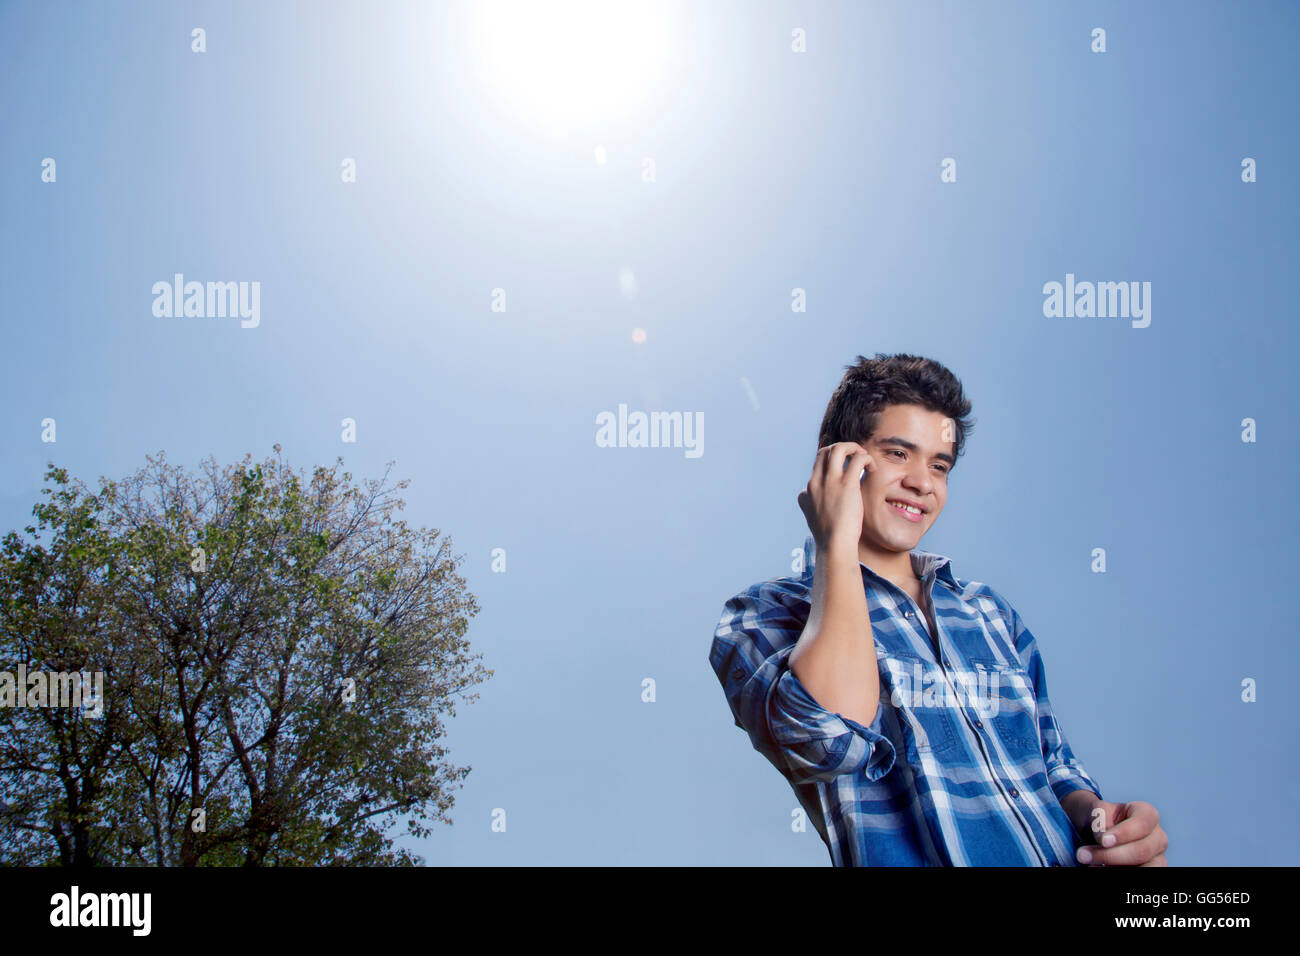 Low angle view of smiling young man with mobile phone Stock Photo